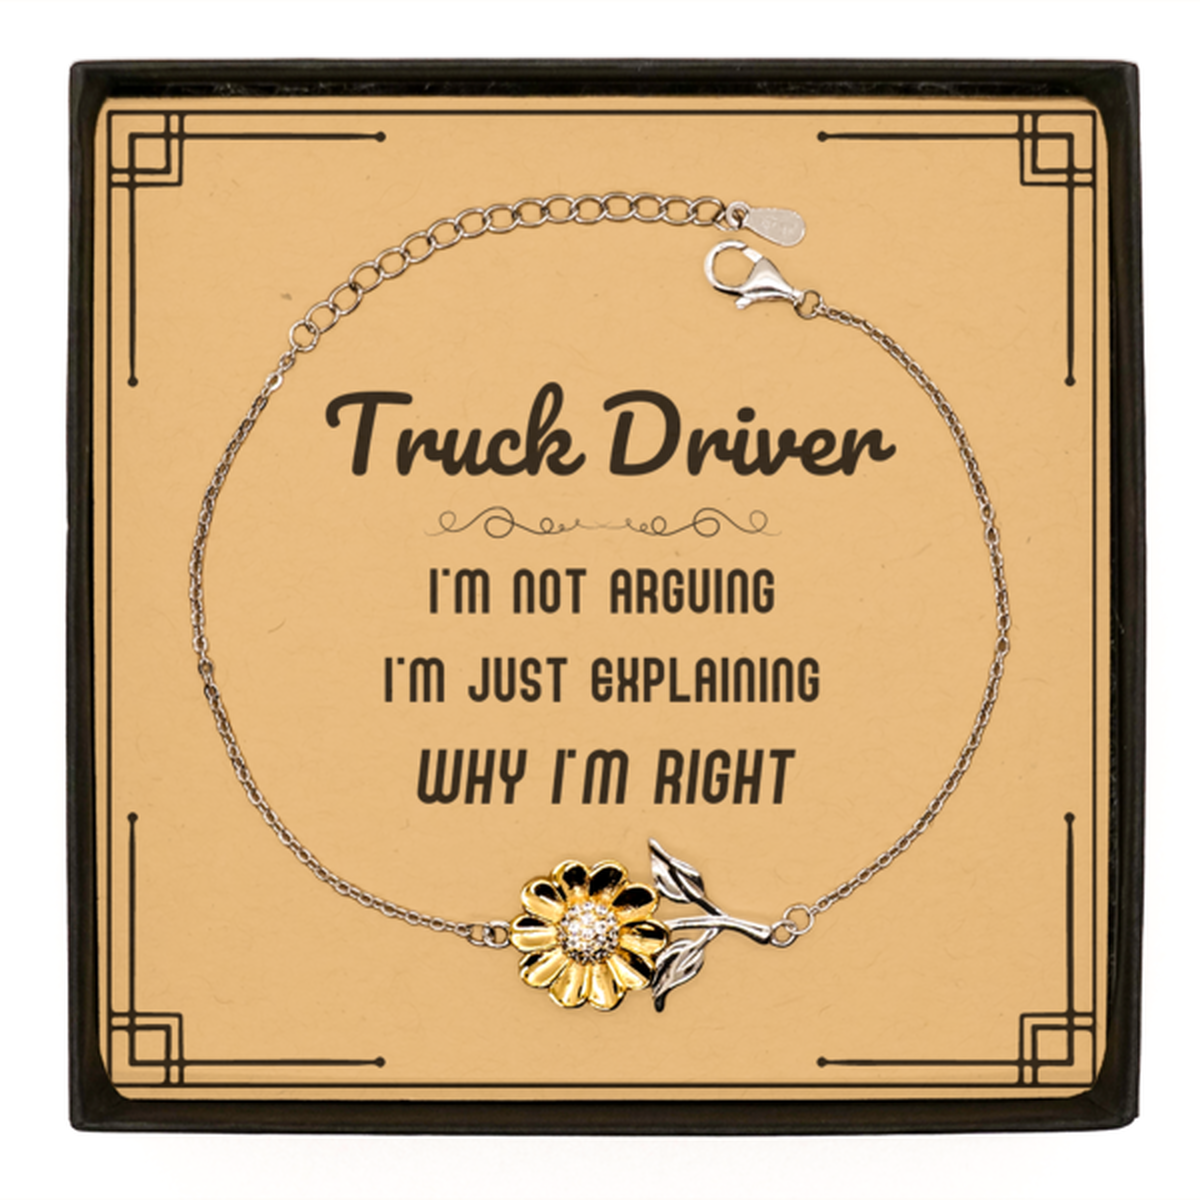 Truck Driver I'm not Arguing. I'm Just Explaining Why I'm RIGHT Sunflower Bracelet, Funny Saying Quote Truck Driver Gifts For Truck Driver Message Card Graduation Birthday Christmas Gifts for Men Women Coworker